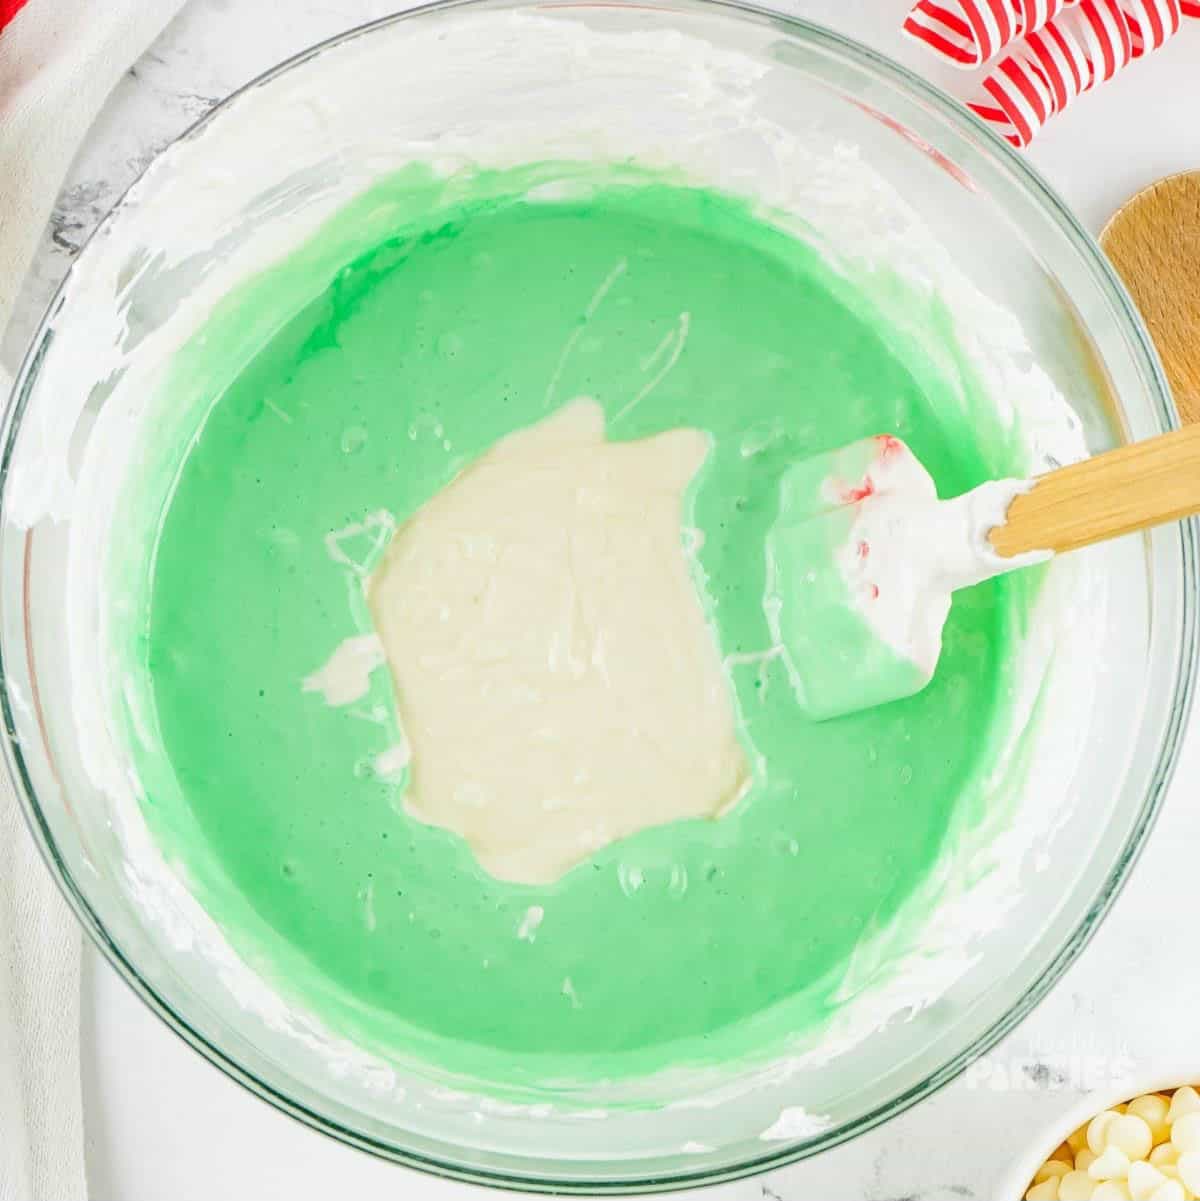 Green colored marshmallow mixture and melted white chocolate chips.